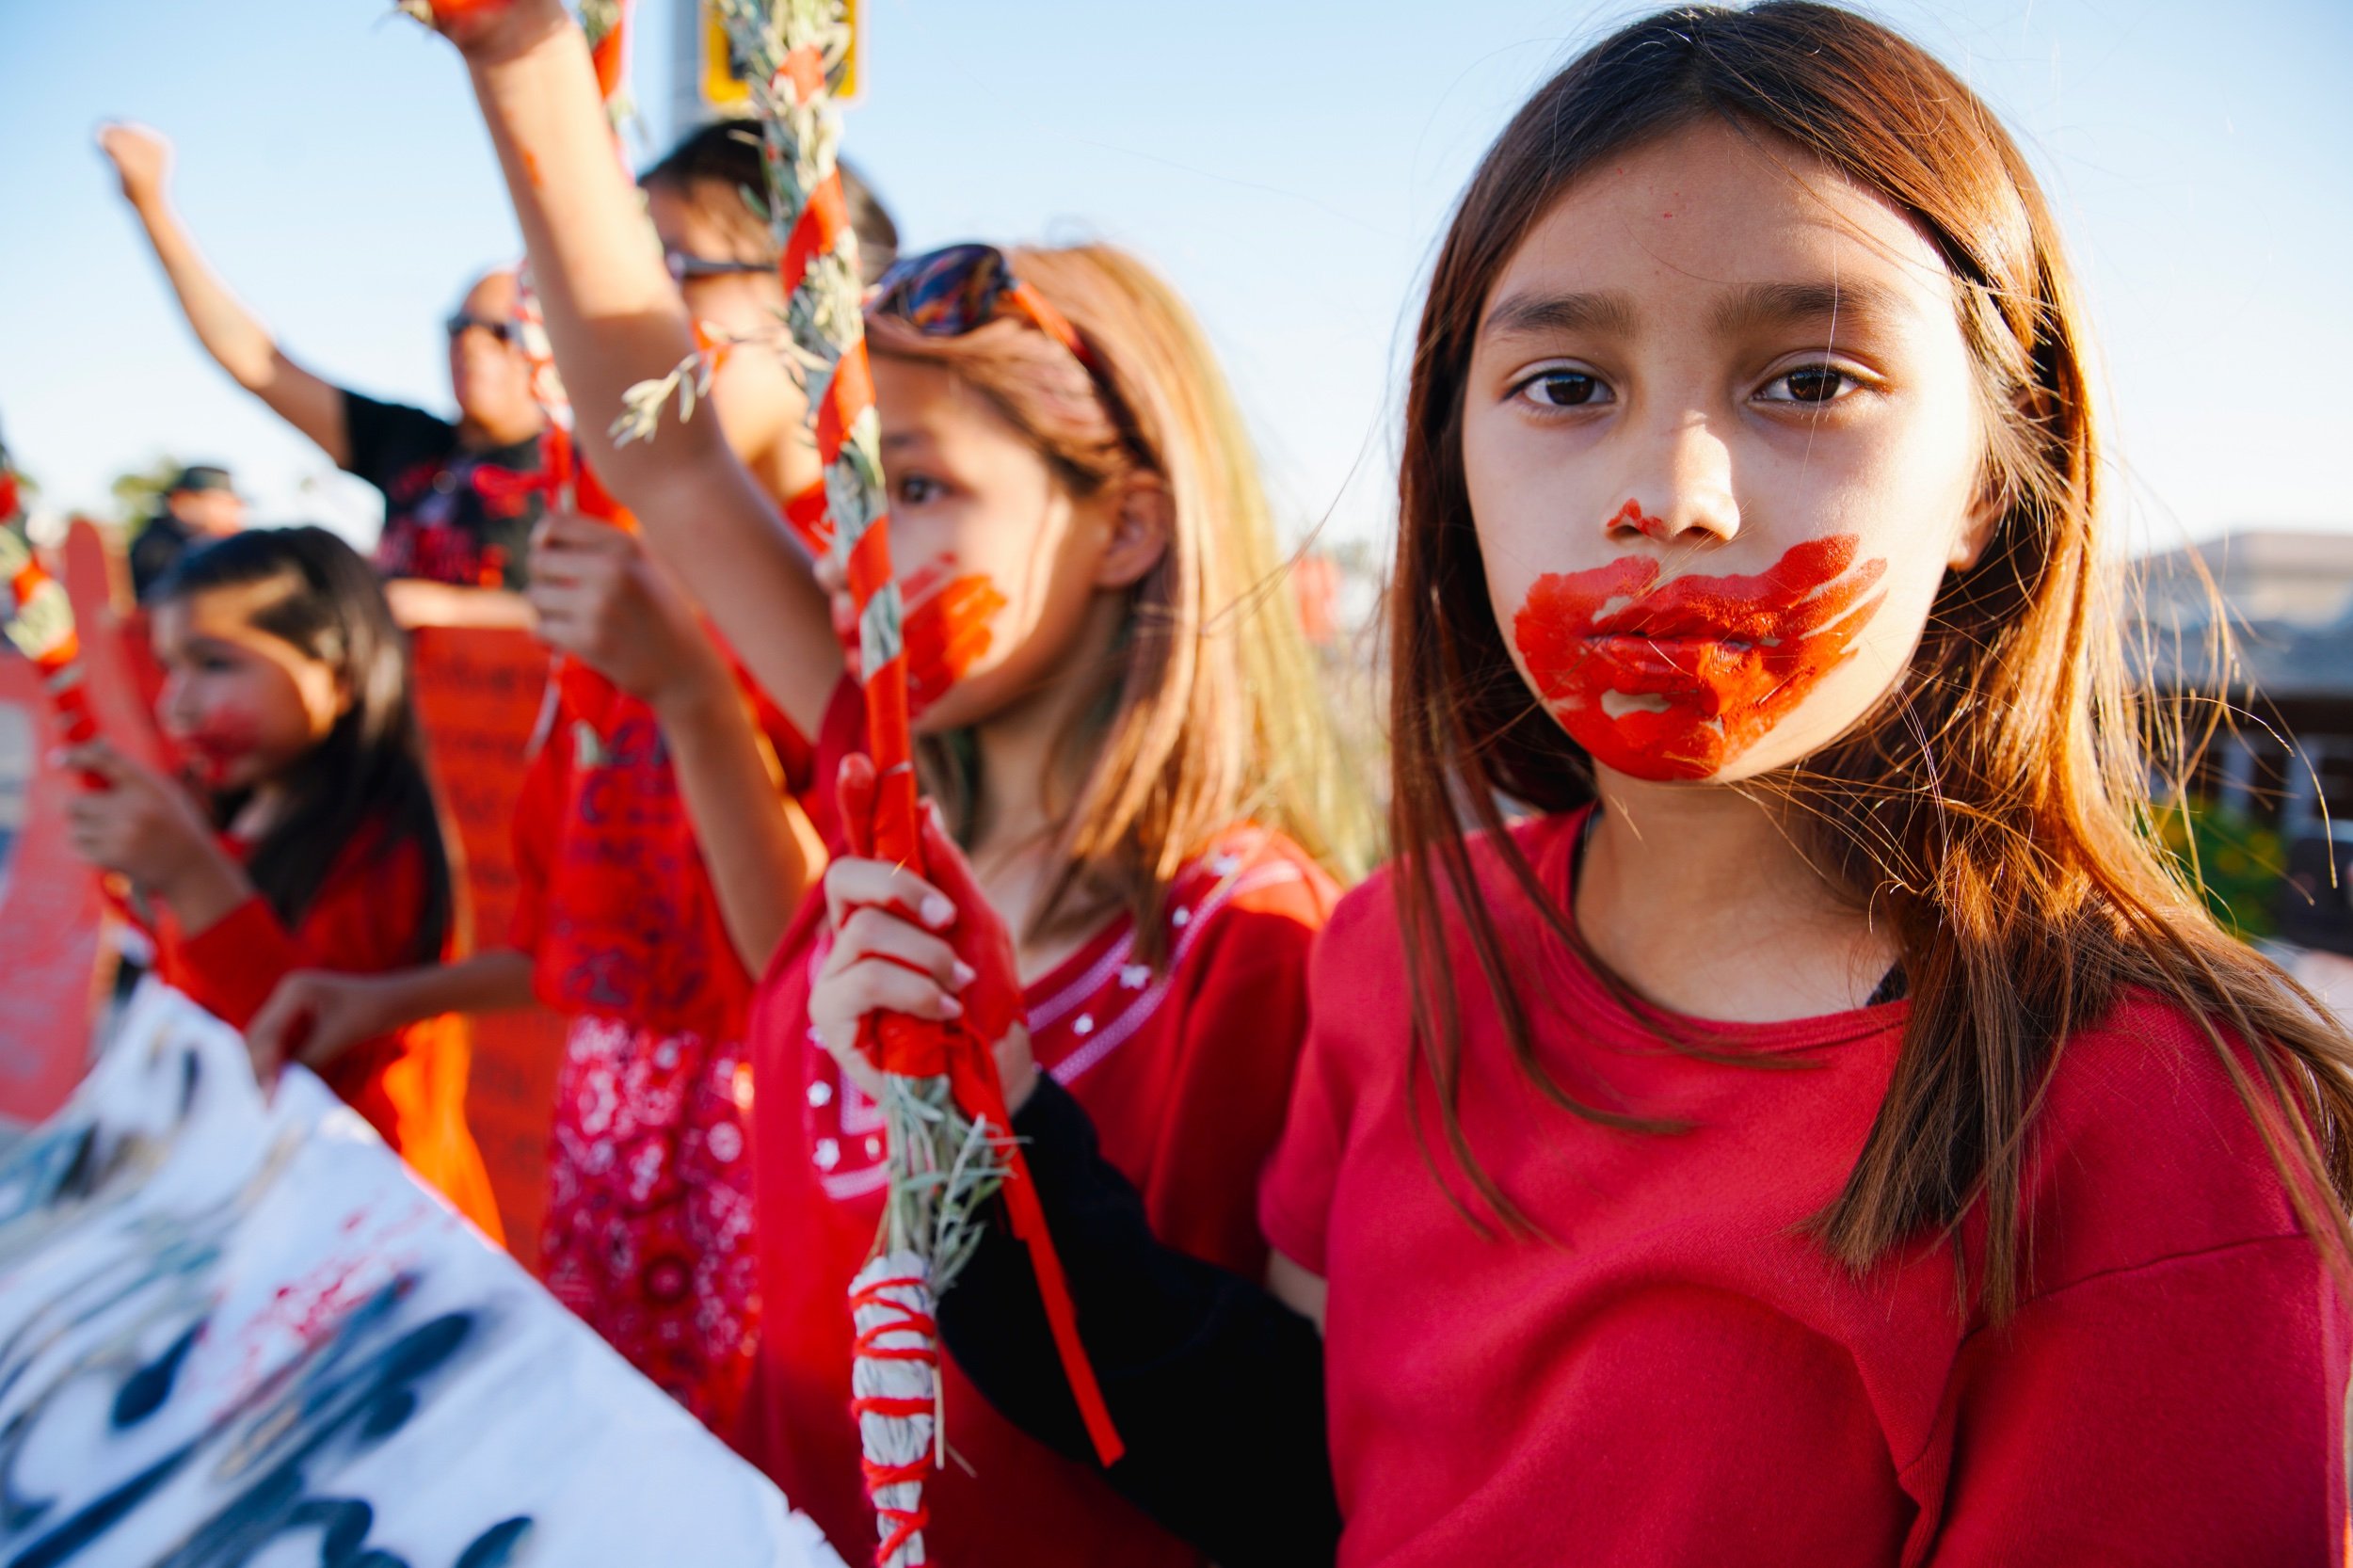  A rally to bring awareness of violence against indigenous women and girls. Yuma, AZ USA 